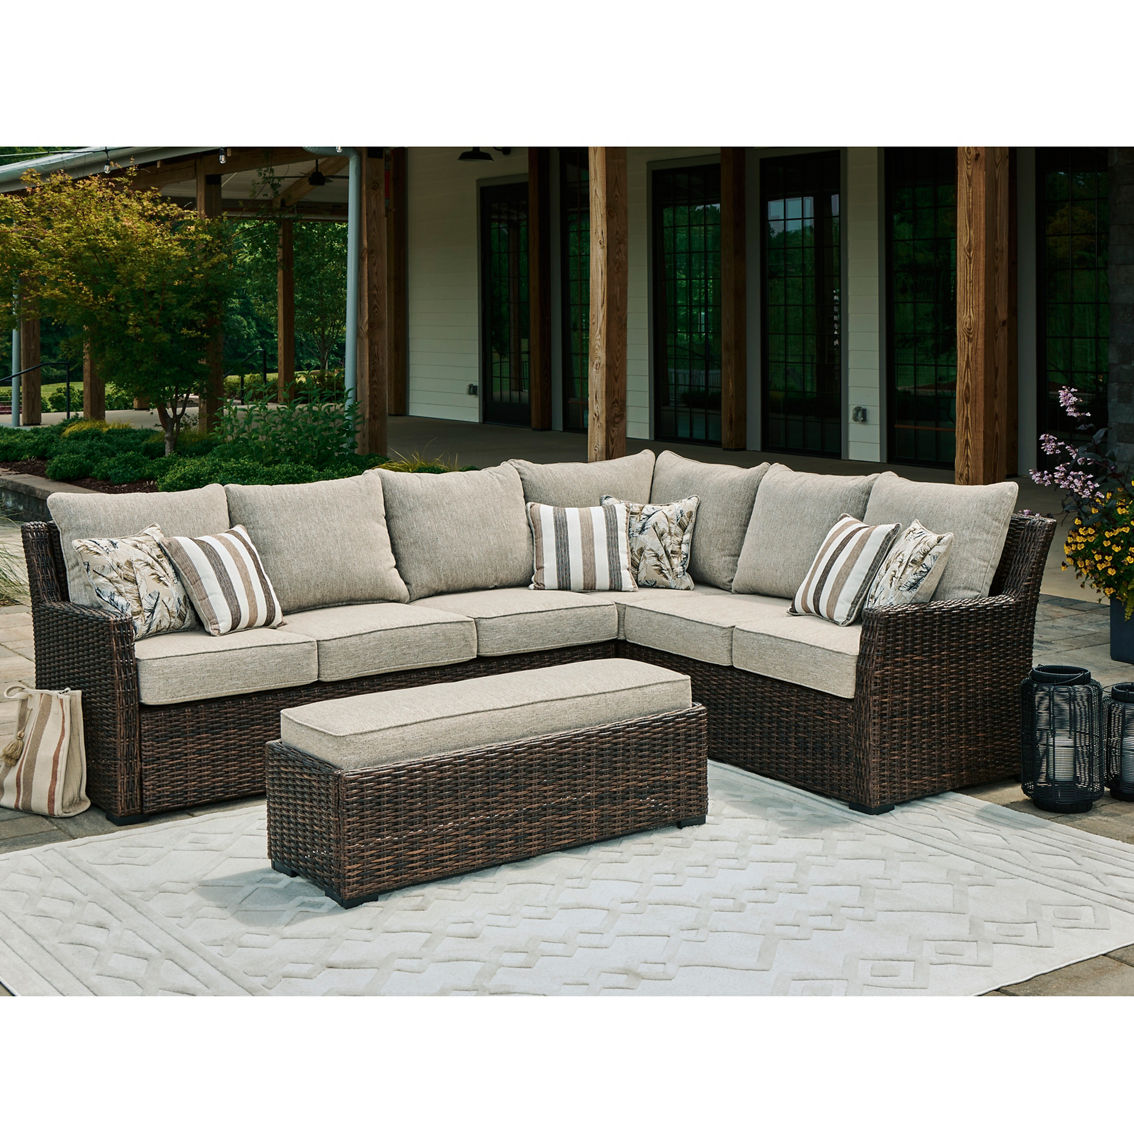 Signature Design by Ashley Brook Ranch 4 pc. Outdoor Sectional Set - Image 2 of 5